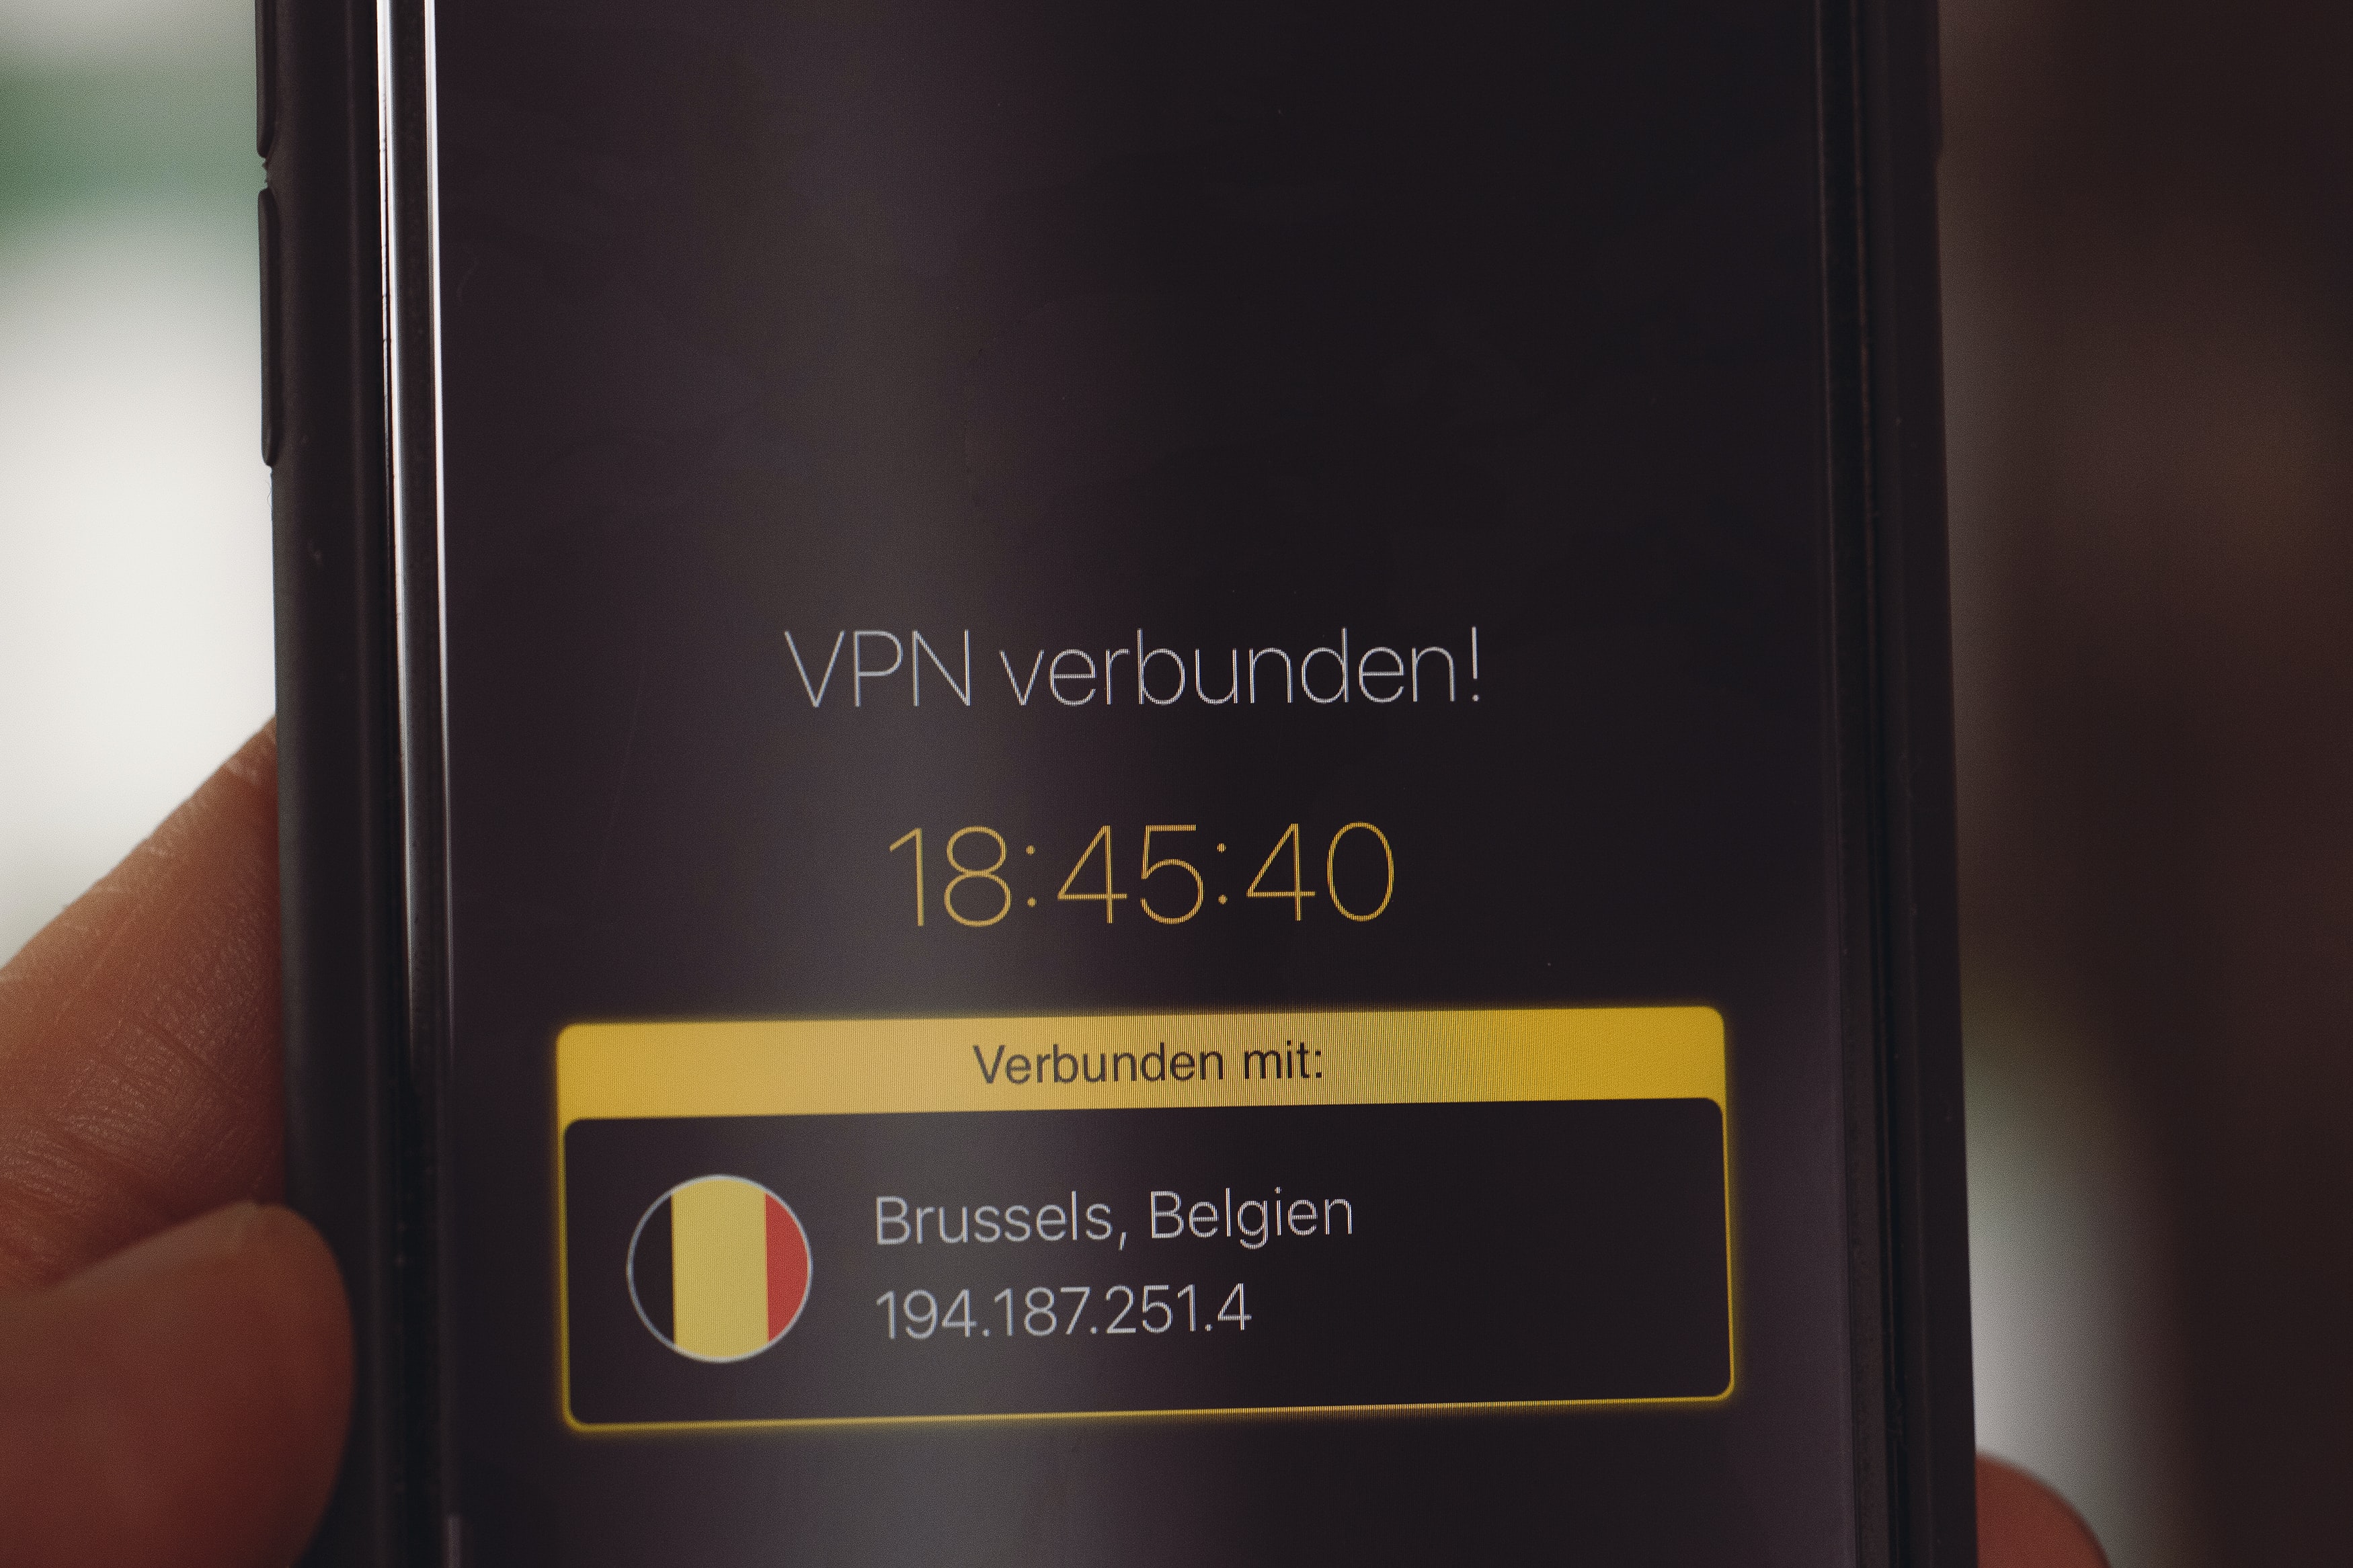 Phone connected to VPN